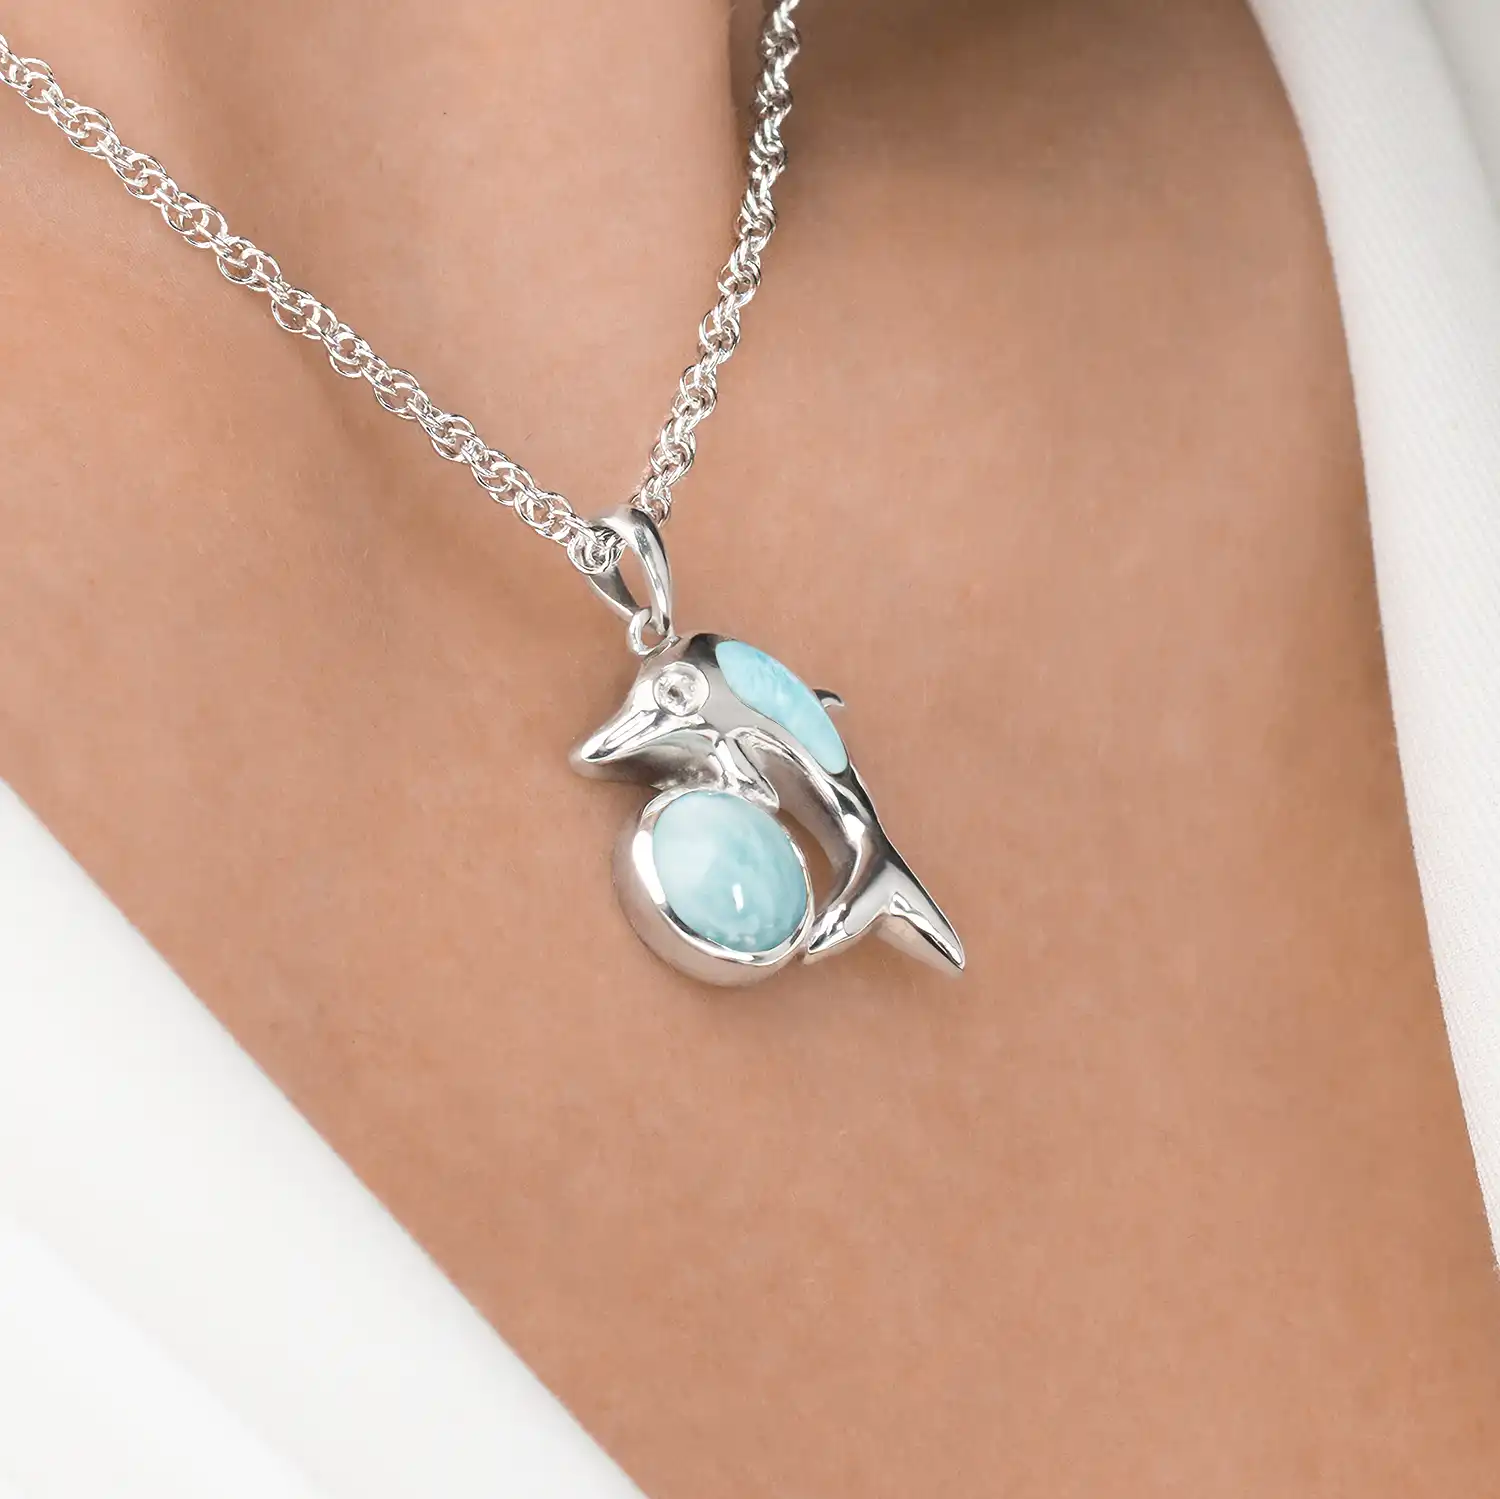 Dolphin Necklace in sterling silver by Marahlago Larimar Jewelry